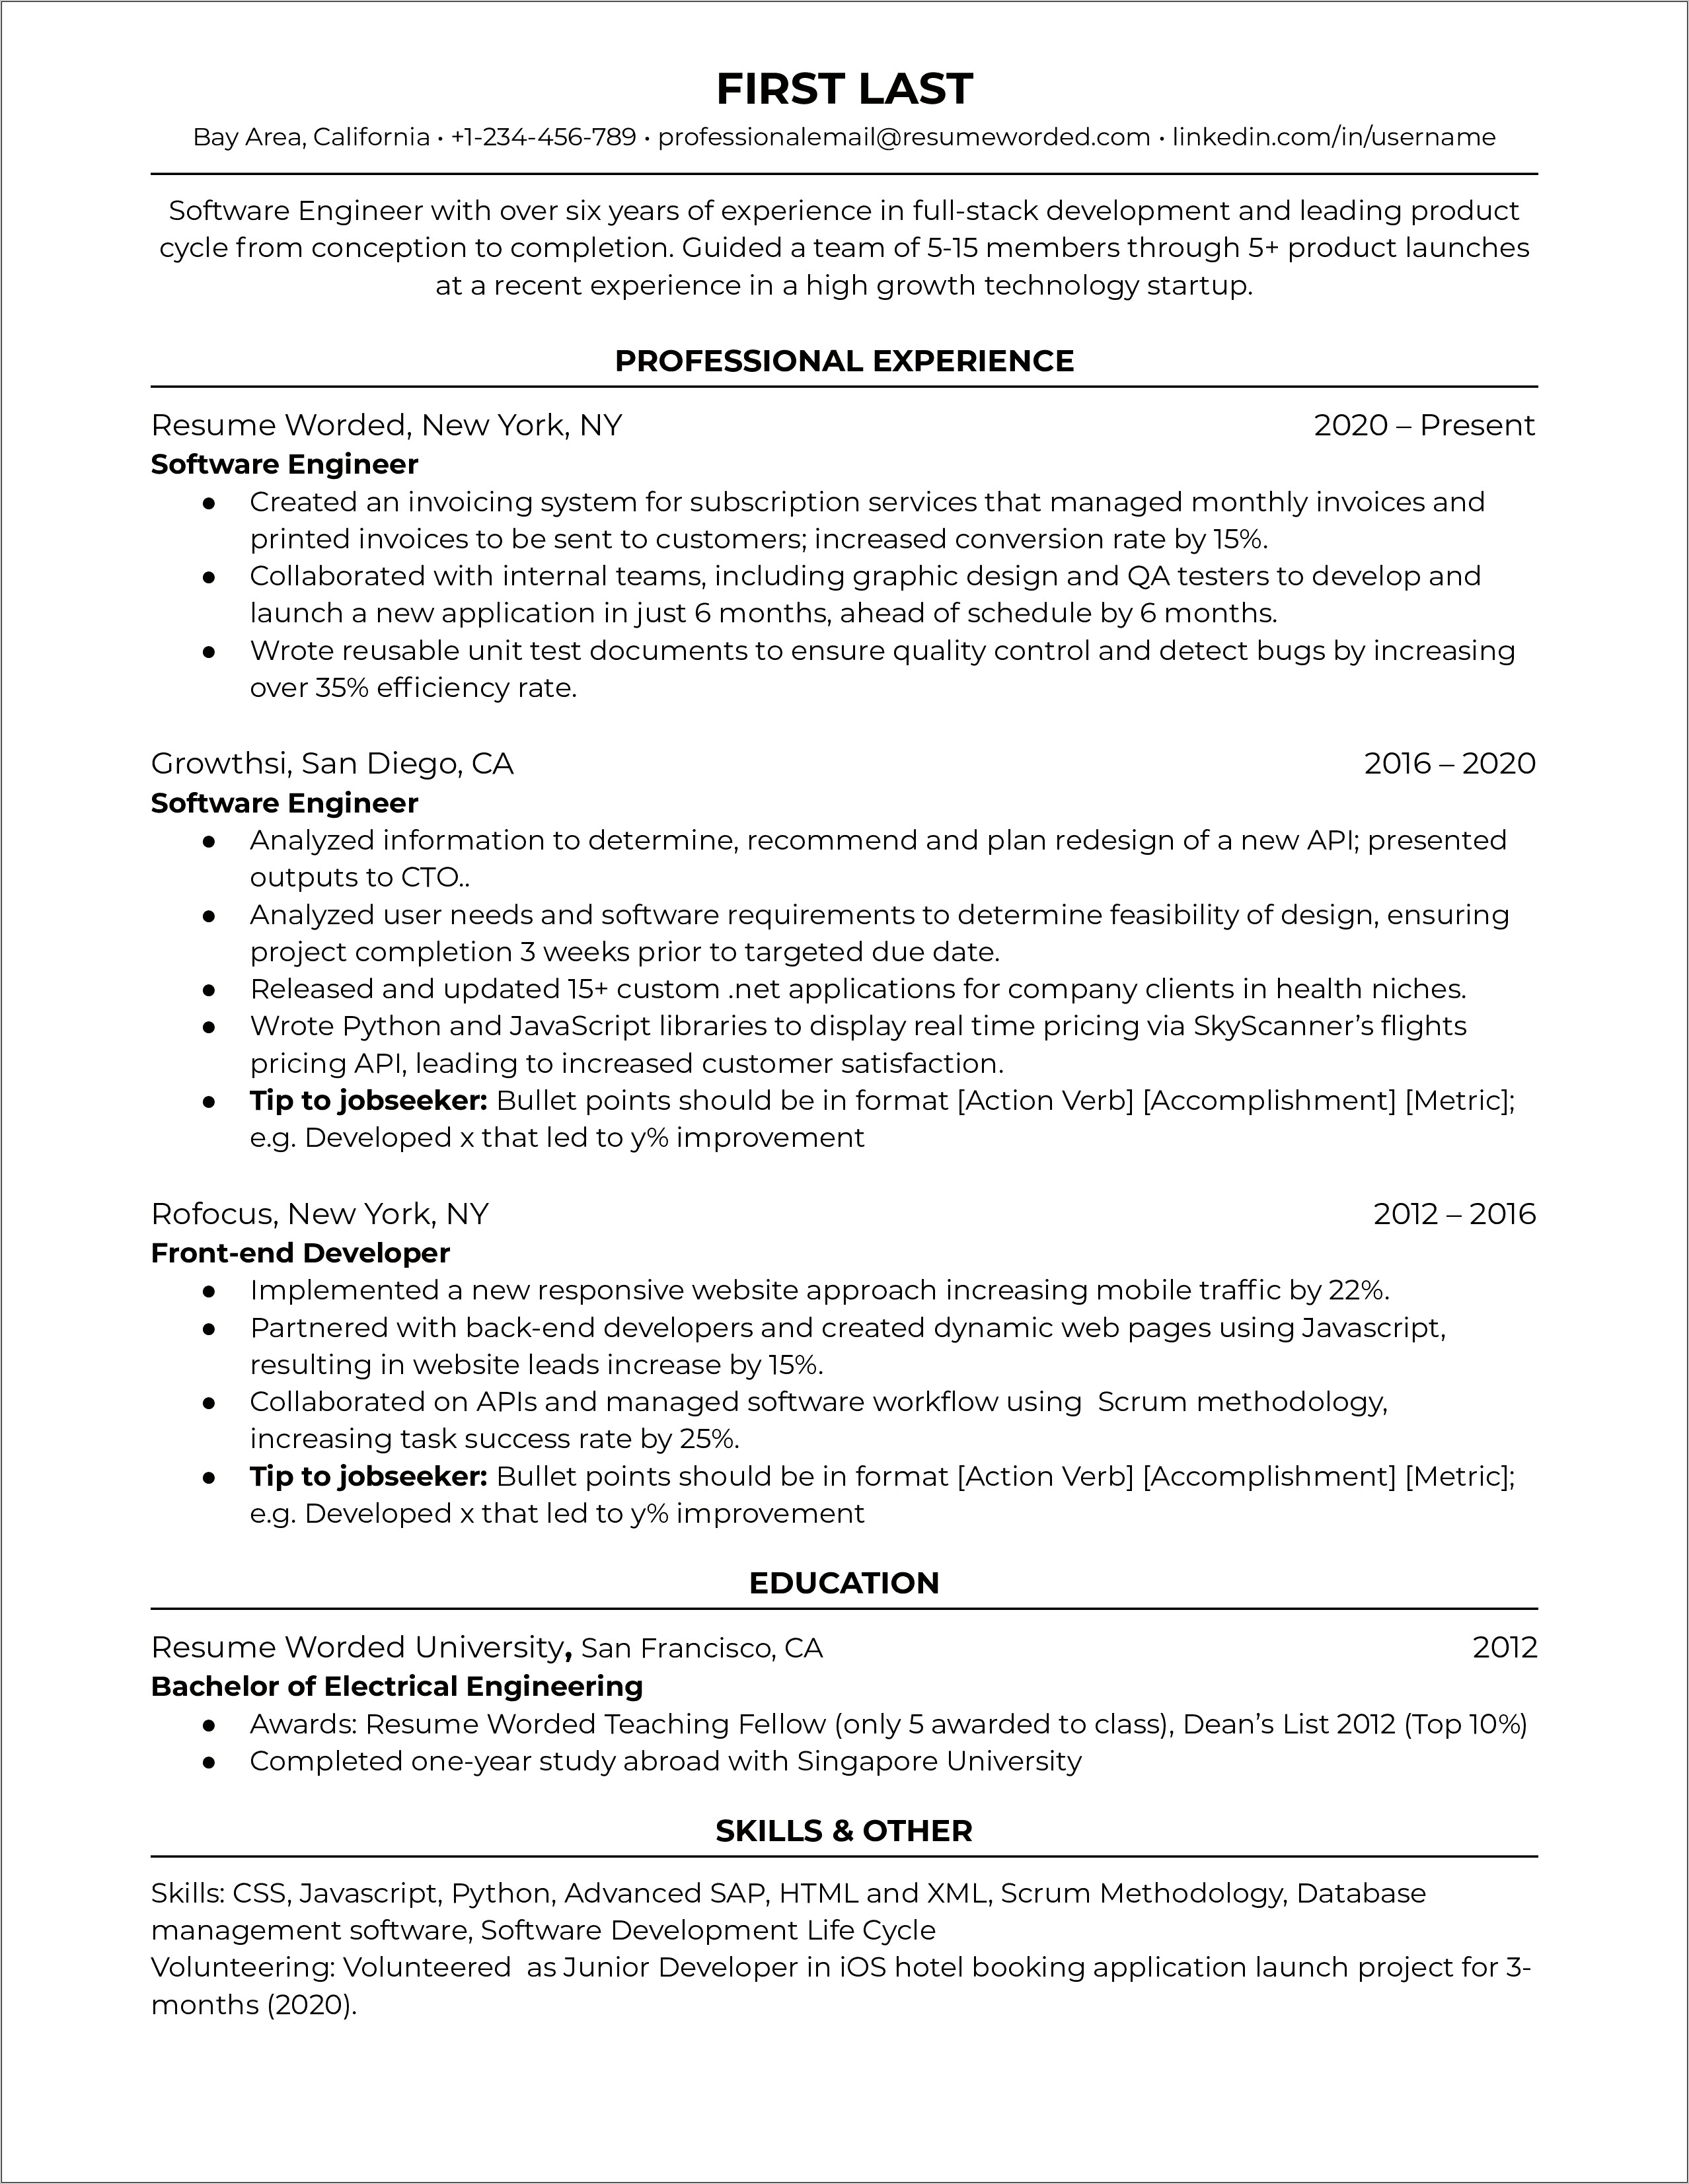 Software Engineer Resume Objective Statement